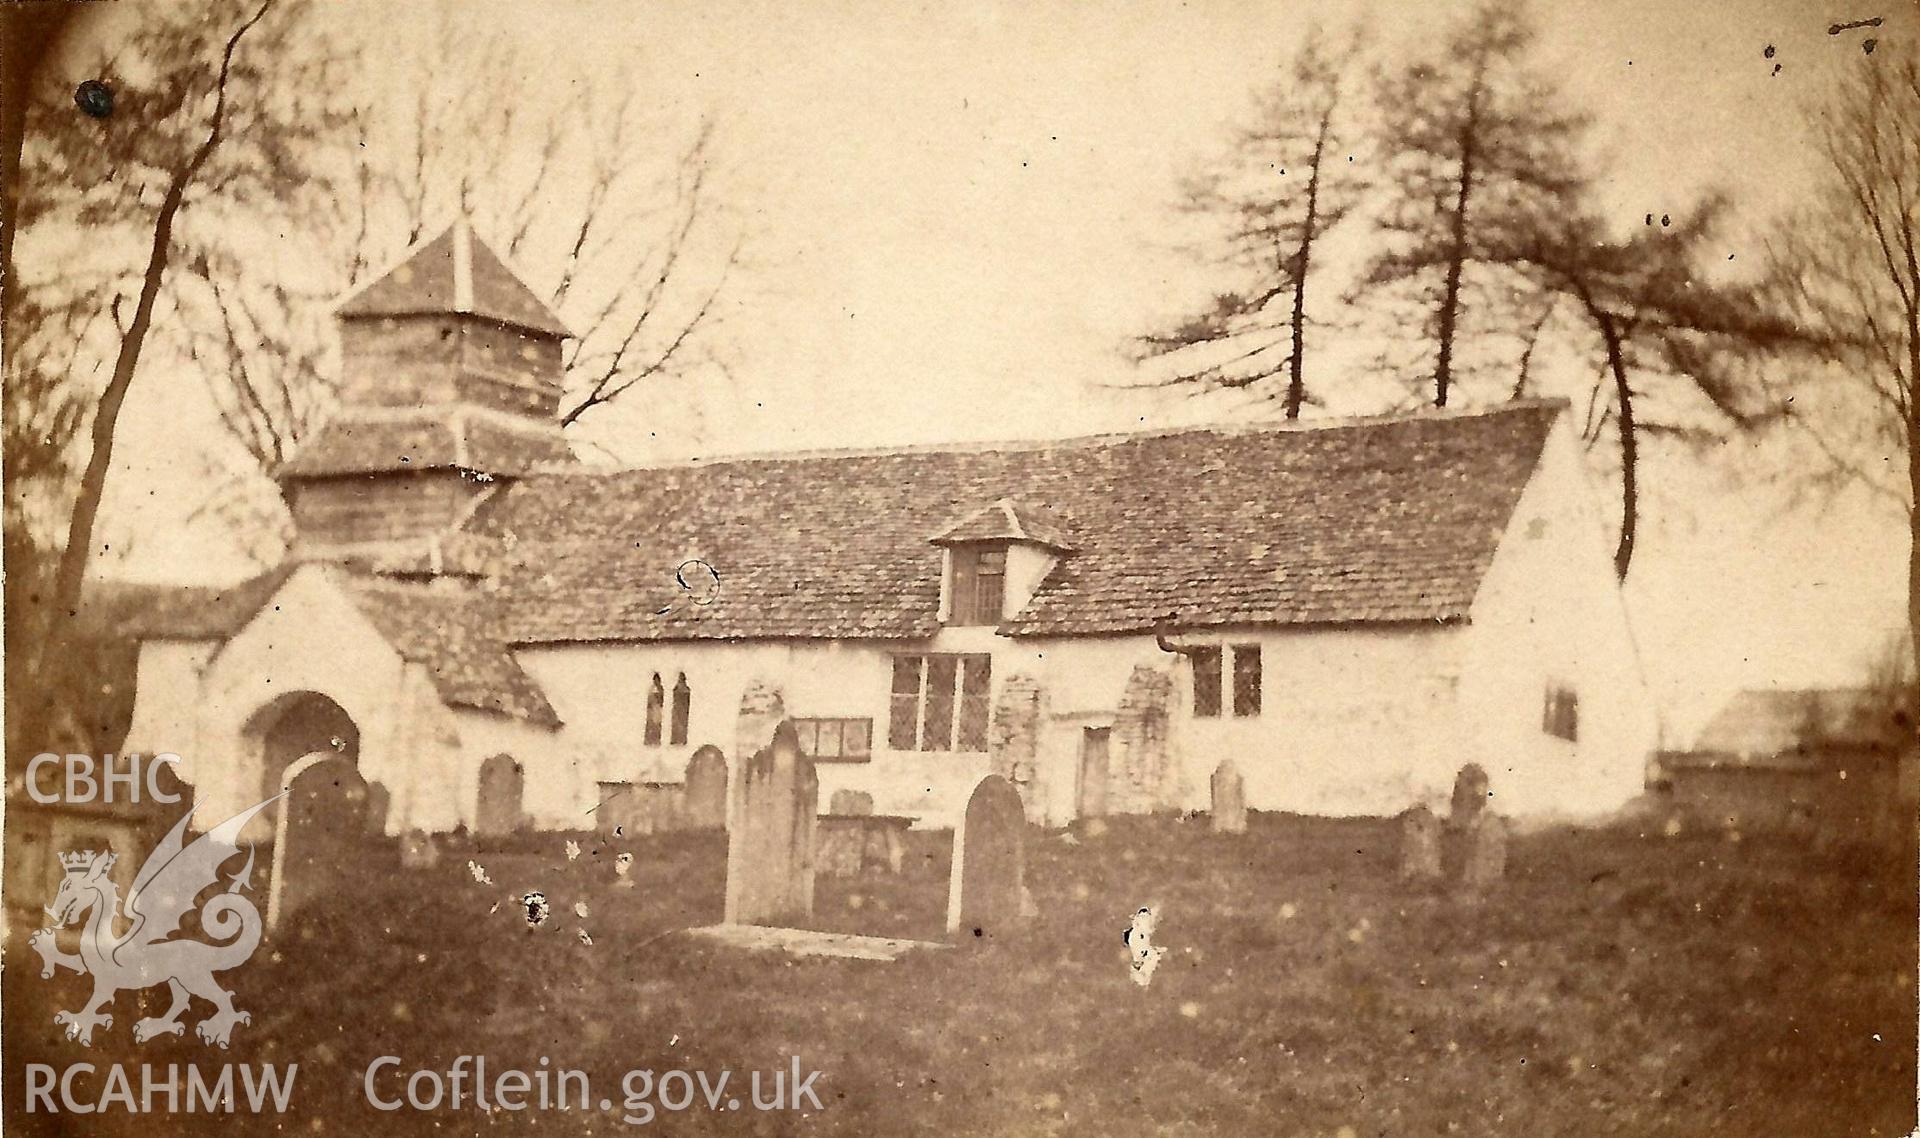 Digital scan of a carte-de-visite photograph of St. Andrew's Church, Norton, Presteigne. The original was taken by William Henry Lloyd of Knighton, c. 1864. The image shows the church from the south-east, and predates the rebuilding of the church by George Gilbert Scott in 1868.